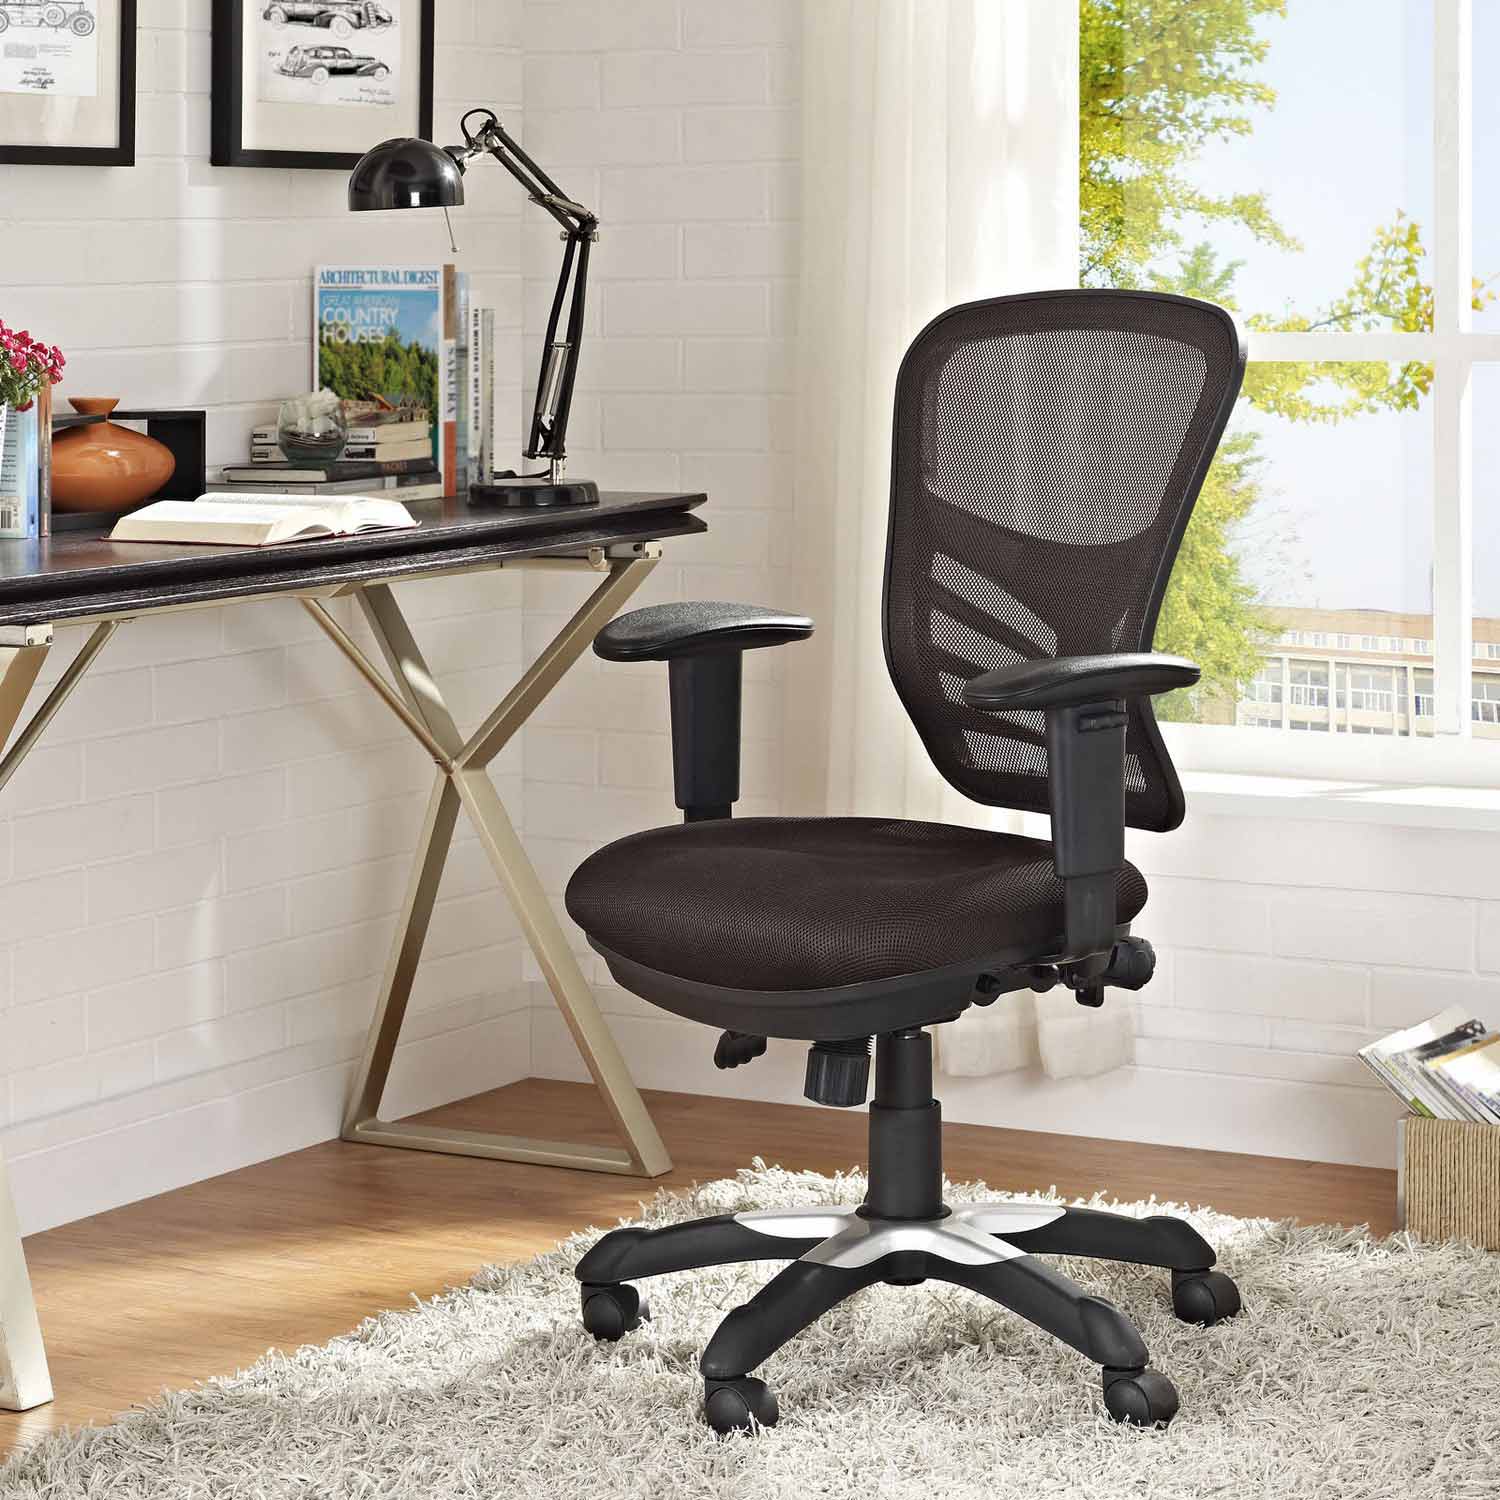 Modway Articulate Mesh Office Chair - Brown